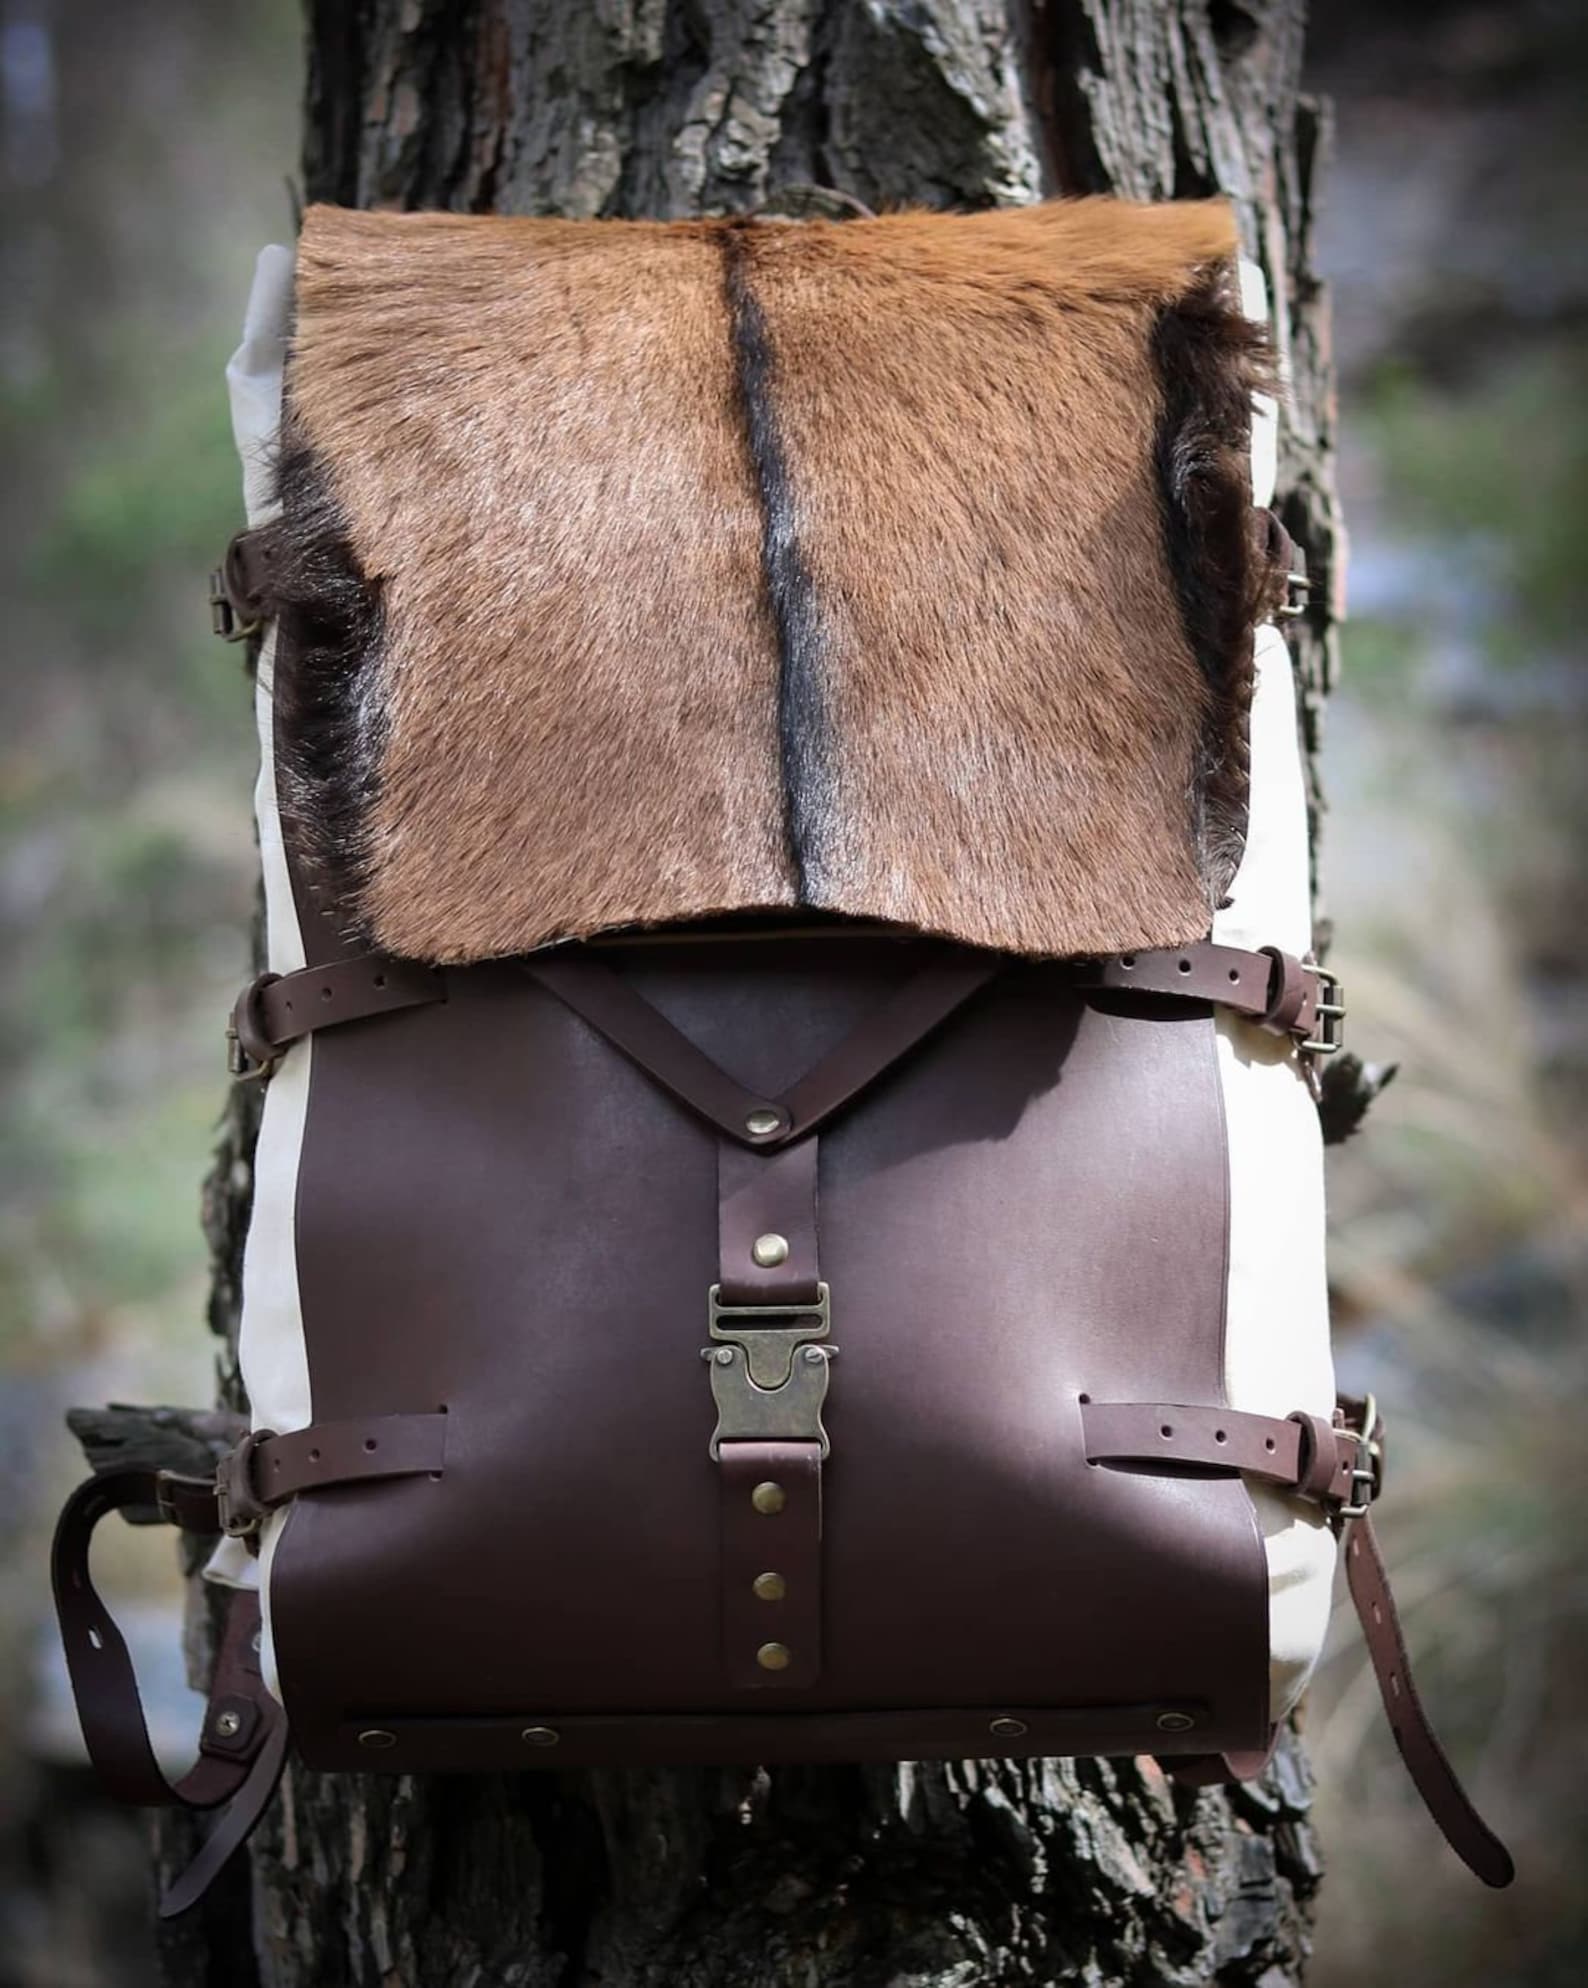 Goat Fur , Canvas and Leather Bag | Bushcraft | Camping | Outdoor | Hiking | Handmade Backpack l | 30,40,50 Litres option - bushcraft - camping - hiking backpack - 99percenthandmade - 99percenthandmade - White - 30 - With Fur